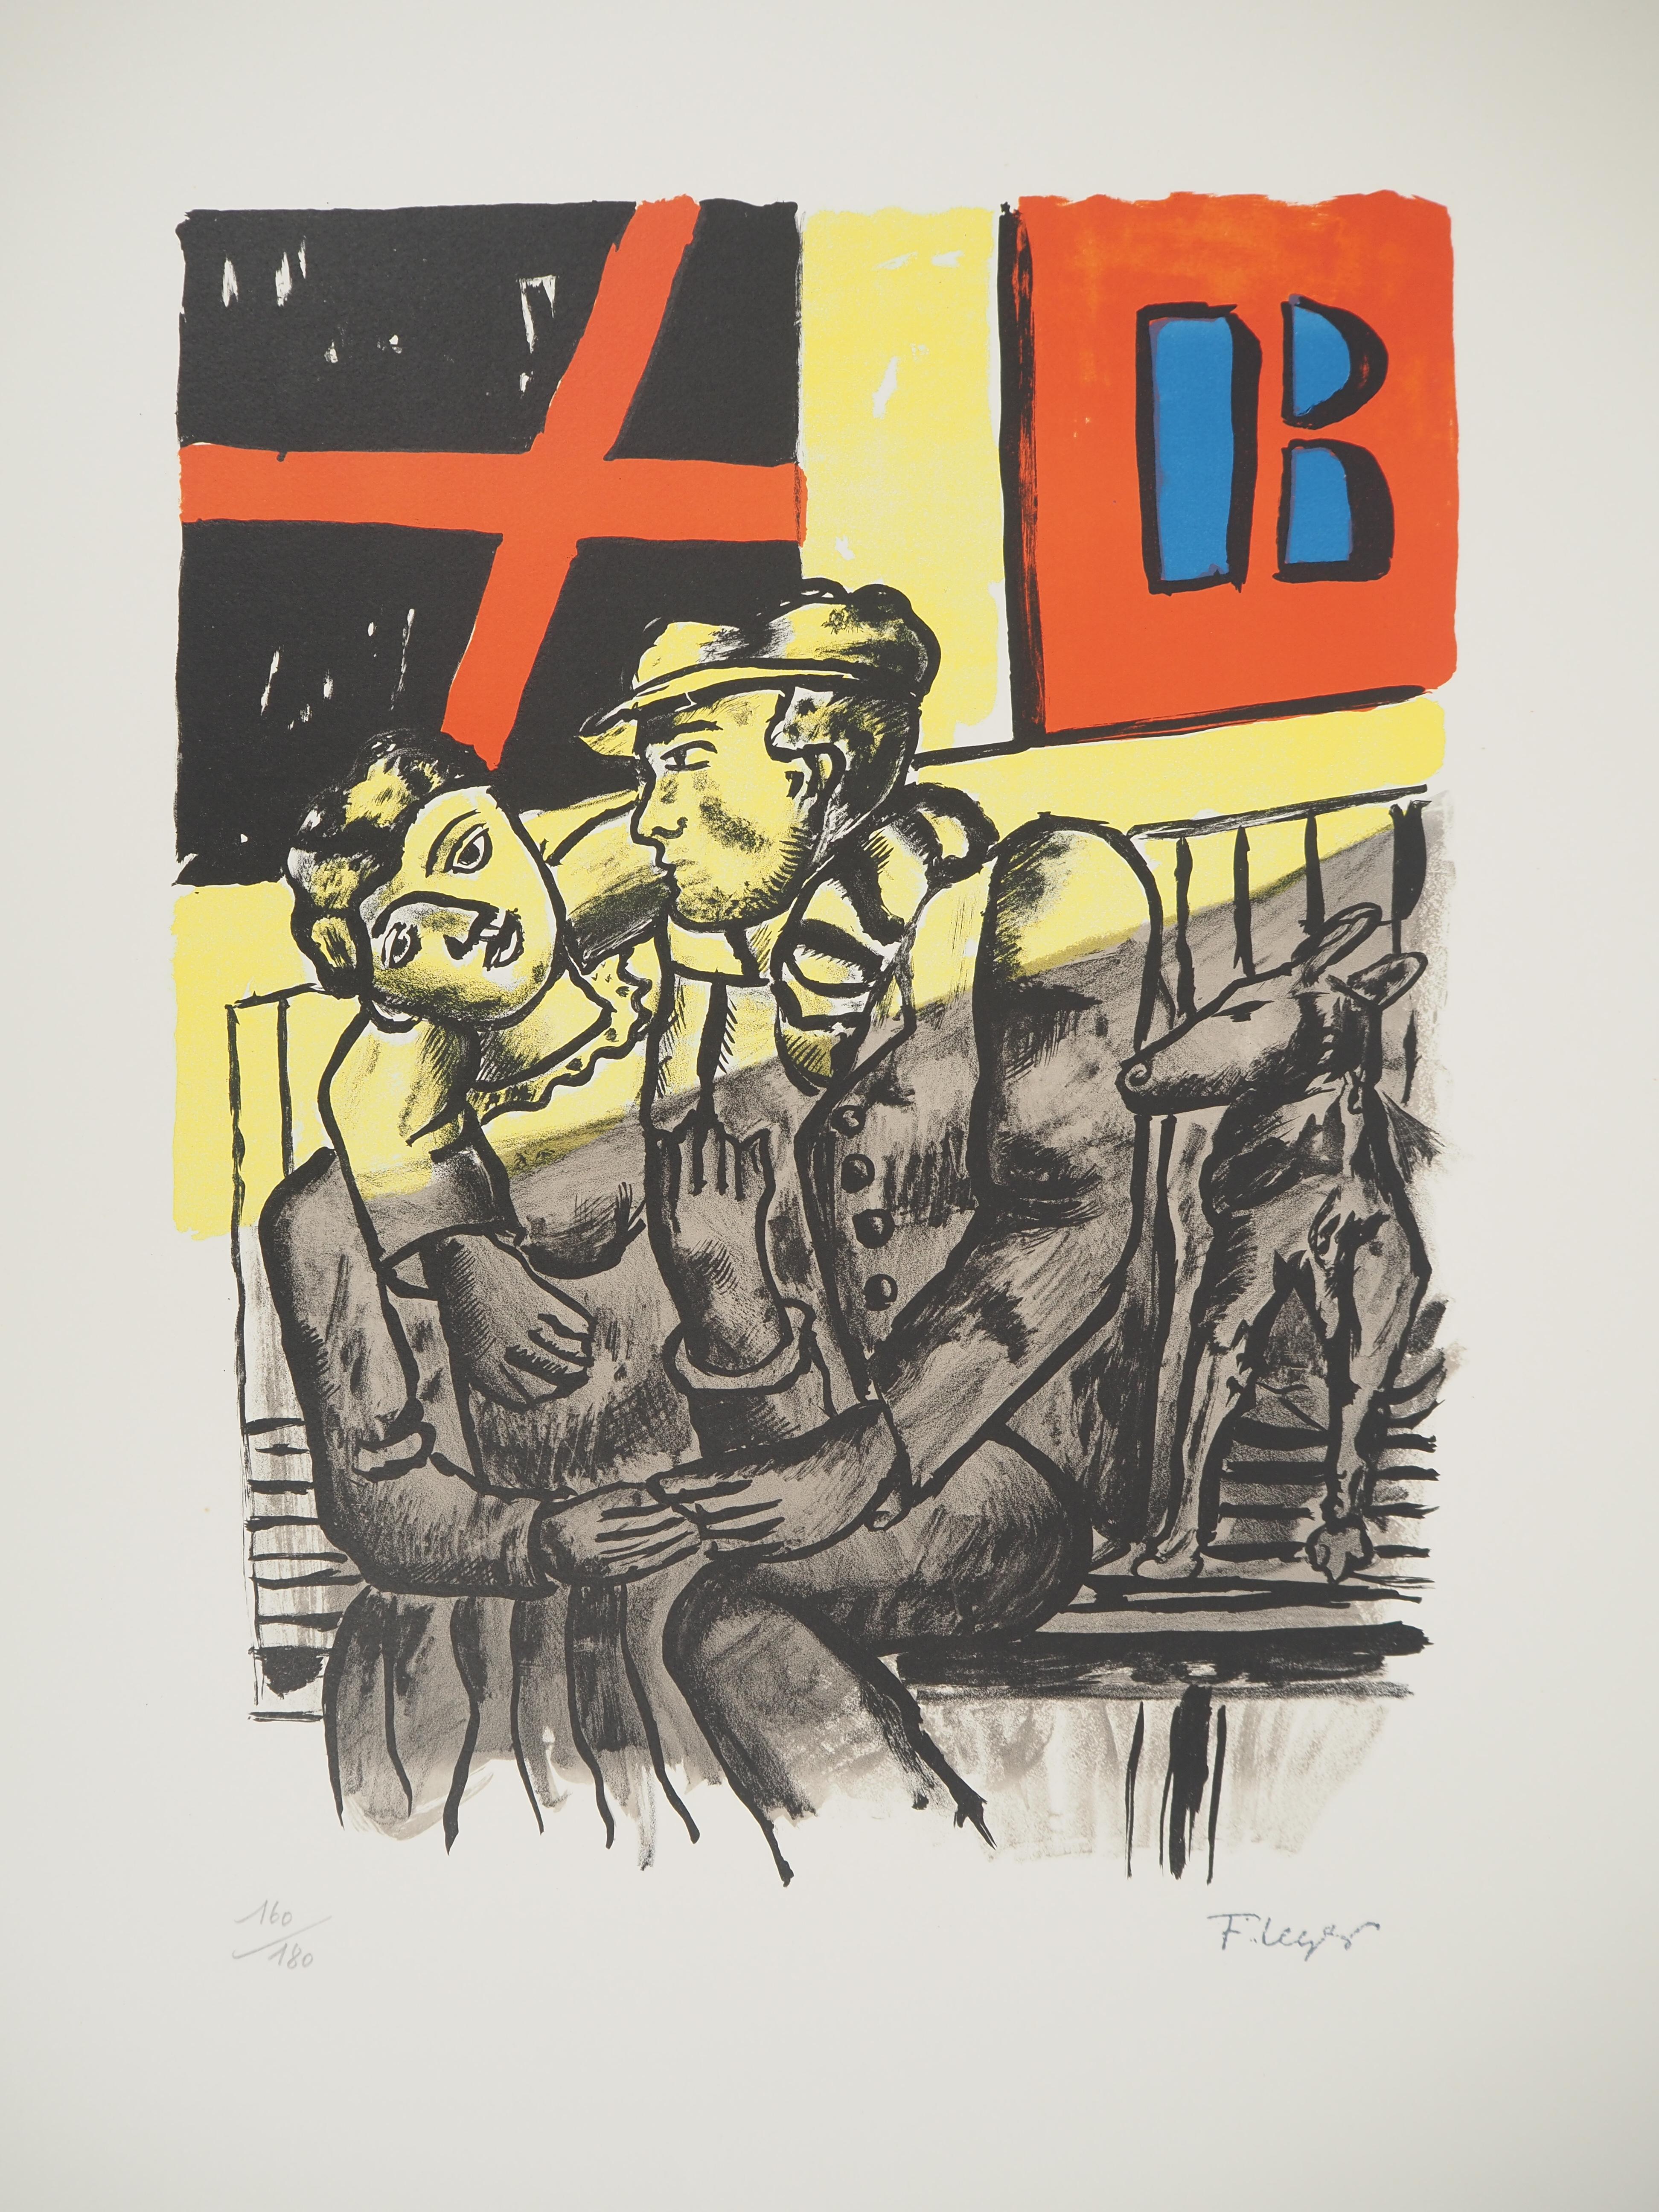 The city, The lovers - Original lithograph, HANDSIGNED, 1959 - Modern Print by Fernand Léger